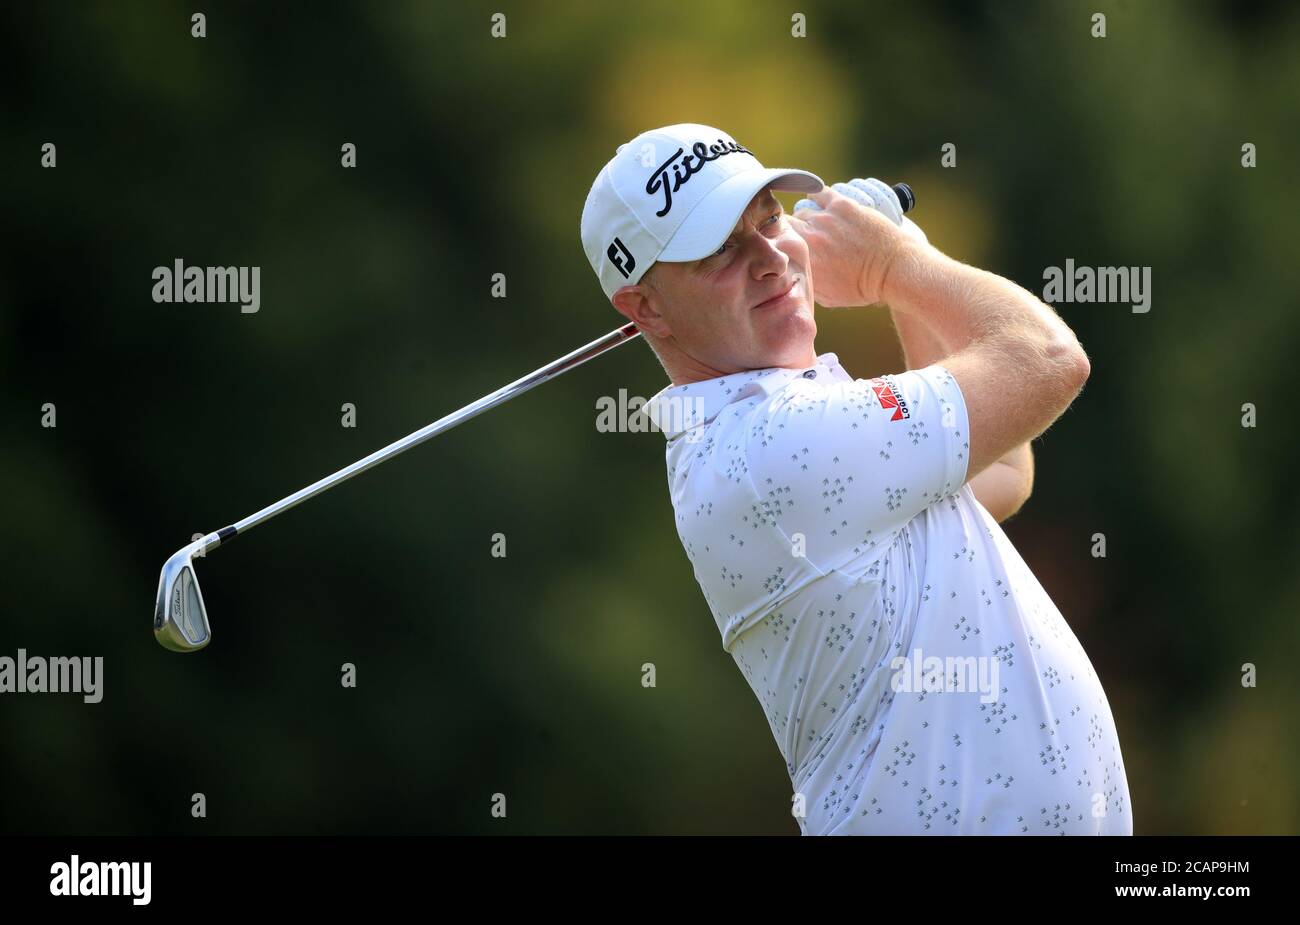 England's Richard Mcevoy during day three of the English Championship at Hanbury Manor Marriott Hotel and Country Club, Hertfordshire. Saturday August 8, 2020. See PA story Golf Ware. Photo credit should read: Adam Davy/PA Wire. RESTRICTIONS: Editorial Use, No Commercial Use. Stock Photo